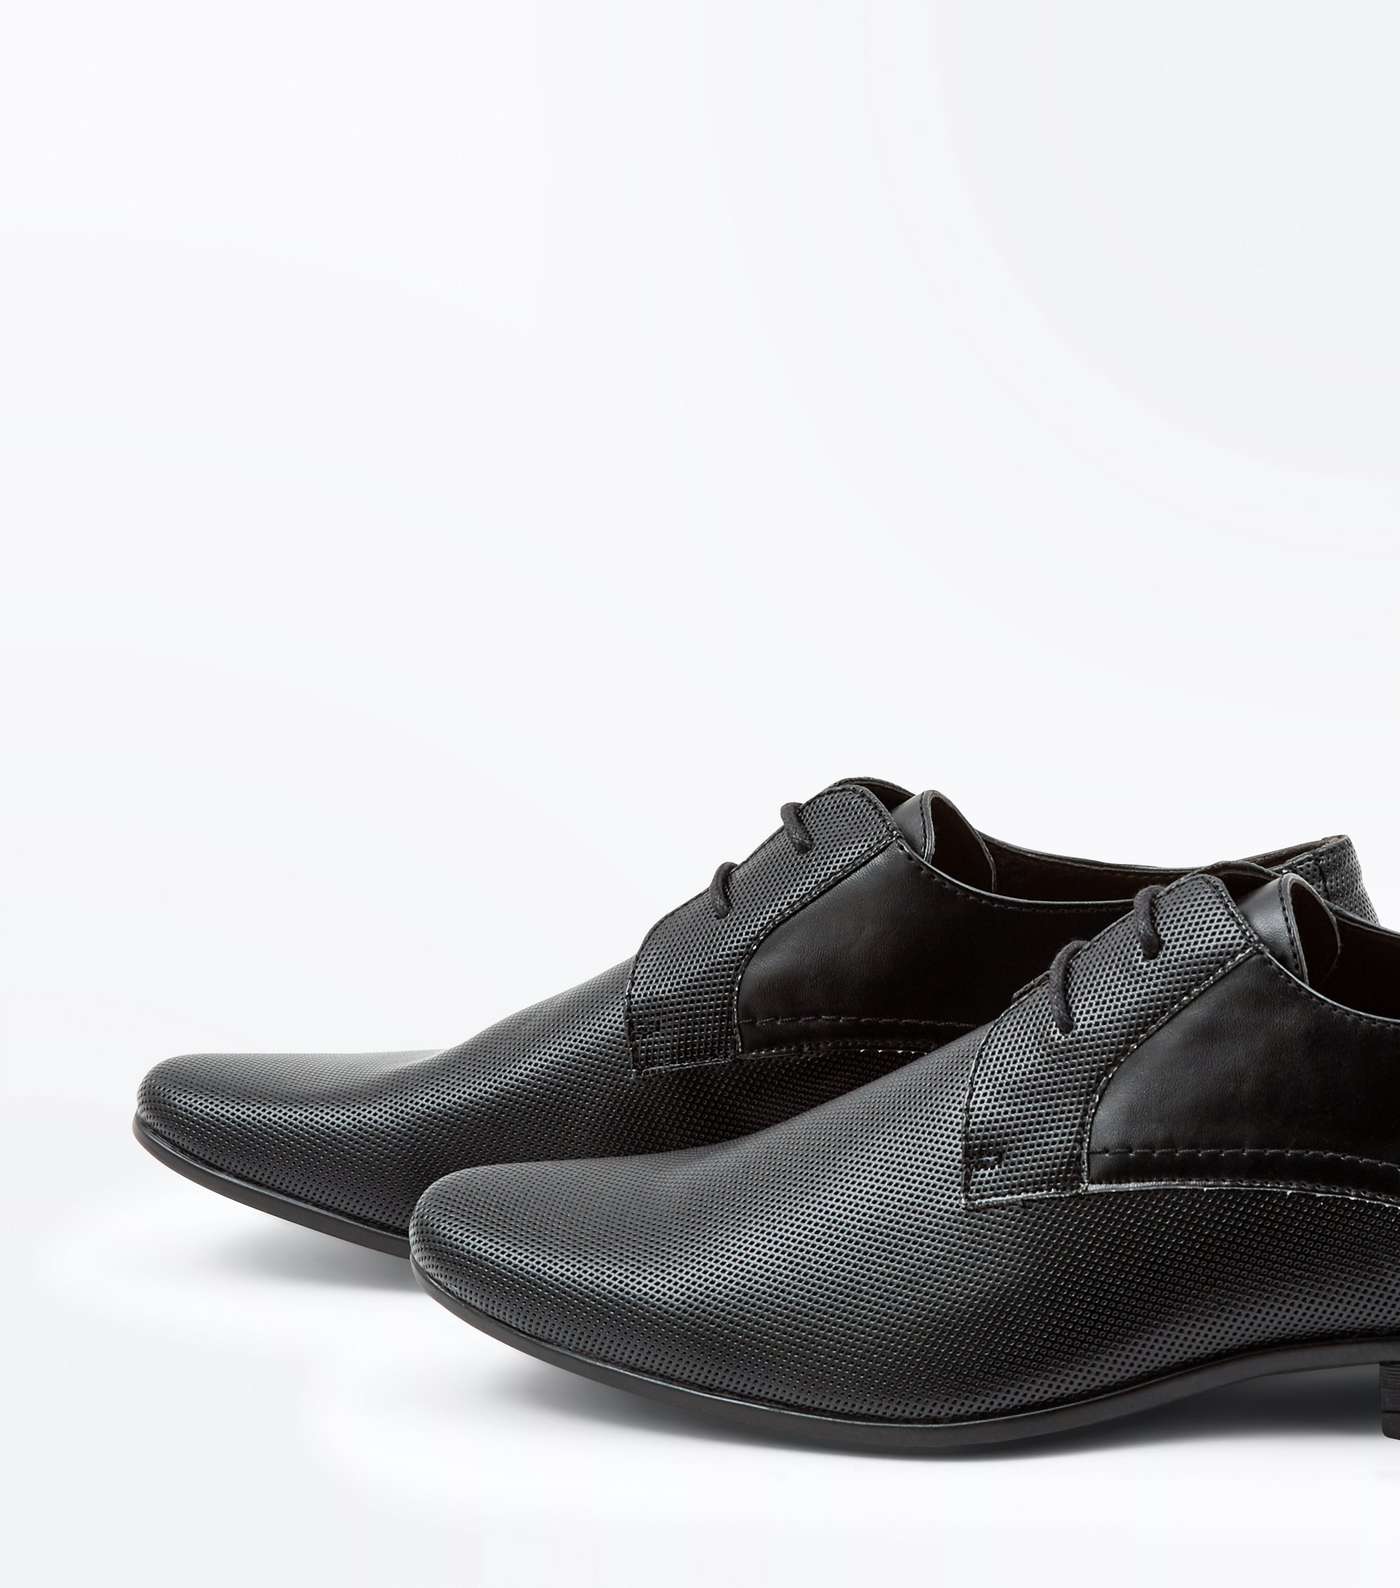 Black Perforated Formal Shoes Image 3